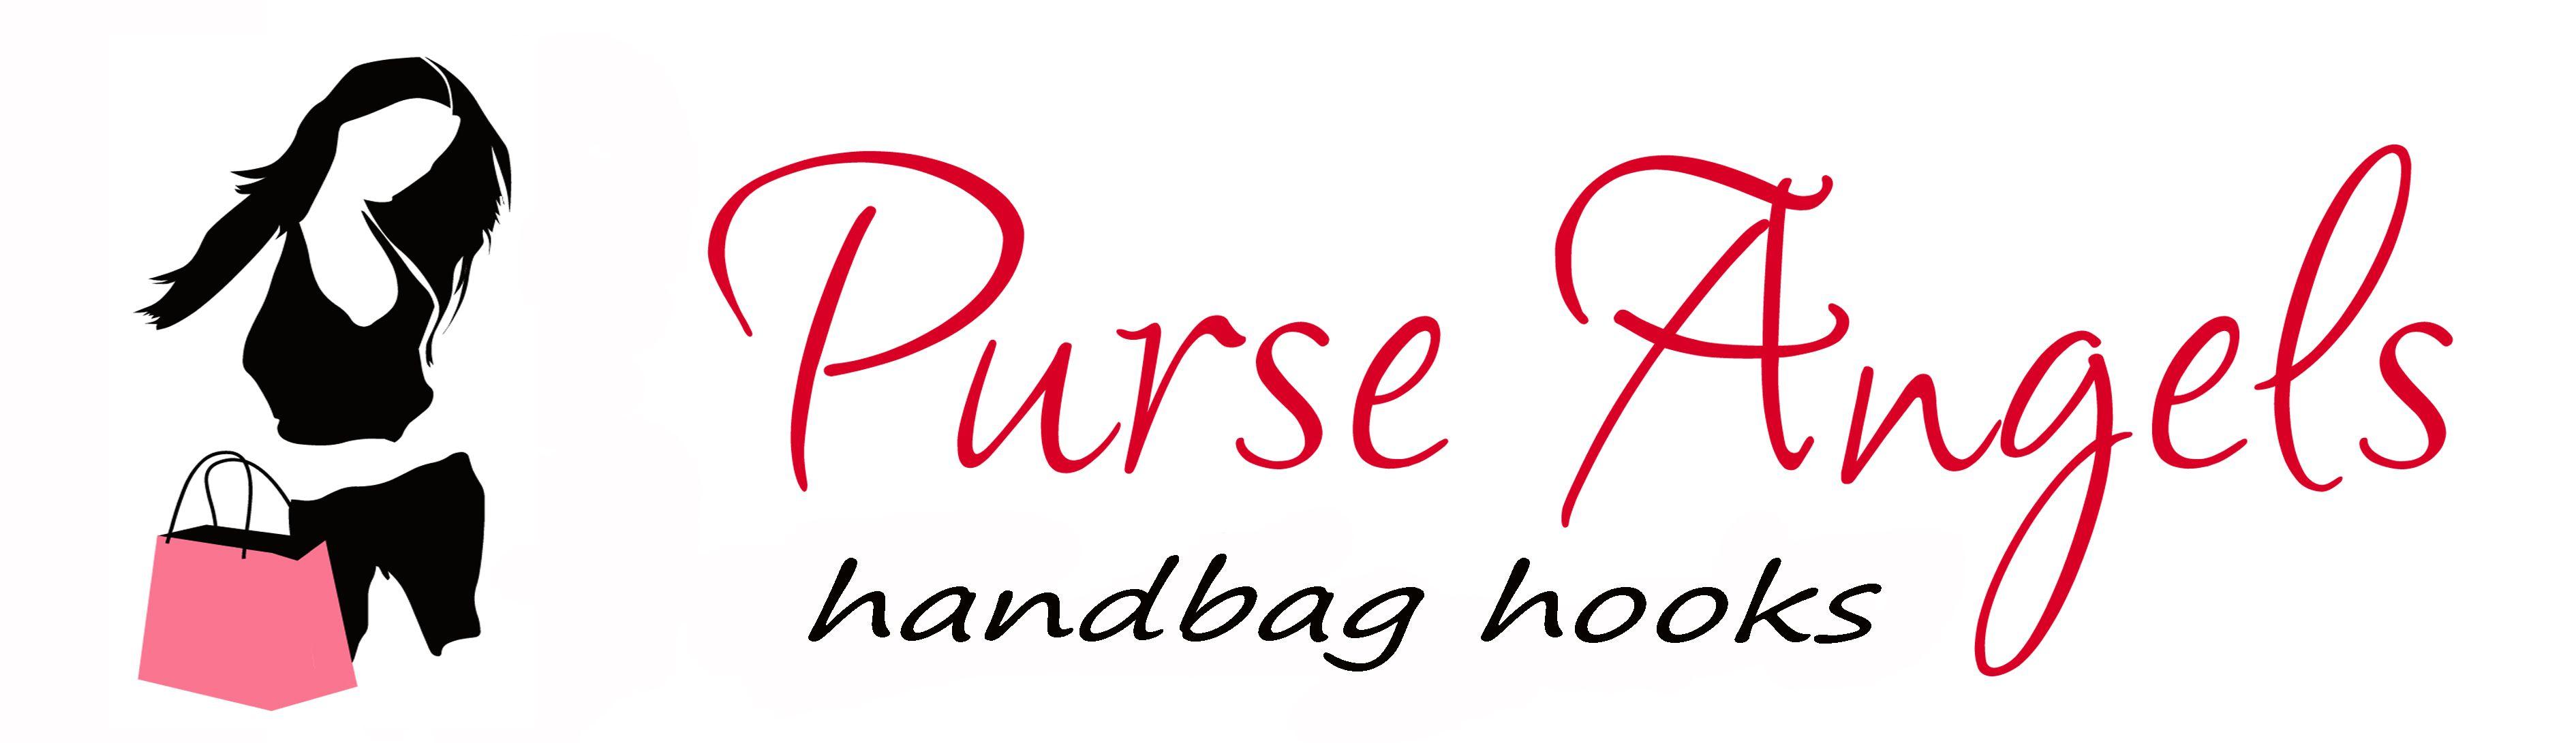 Purse Company Logo - Purse Angels Launches the Guardian of Handbags